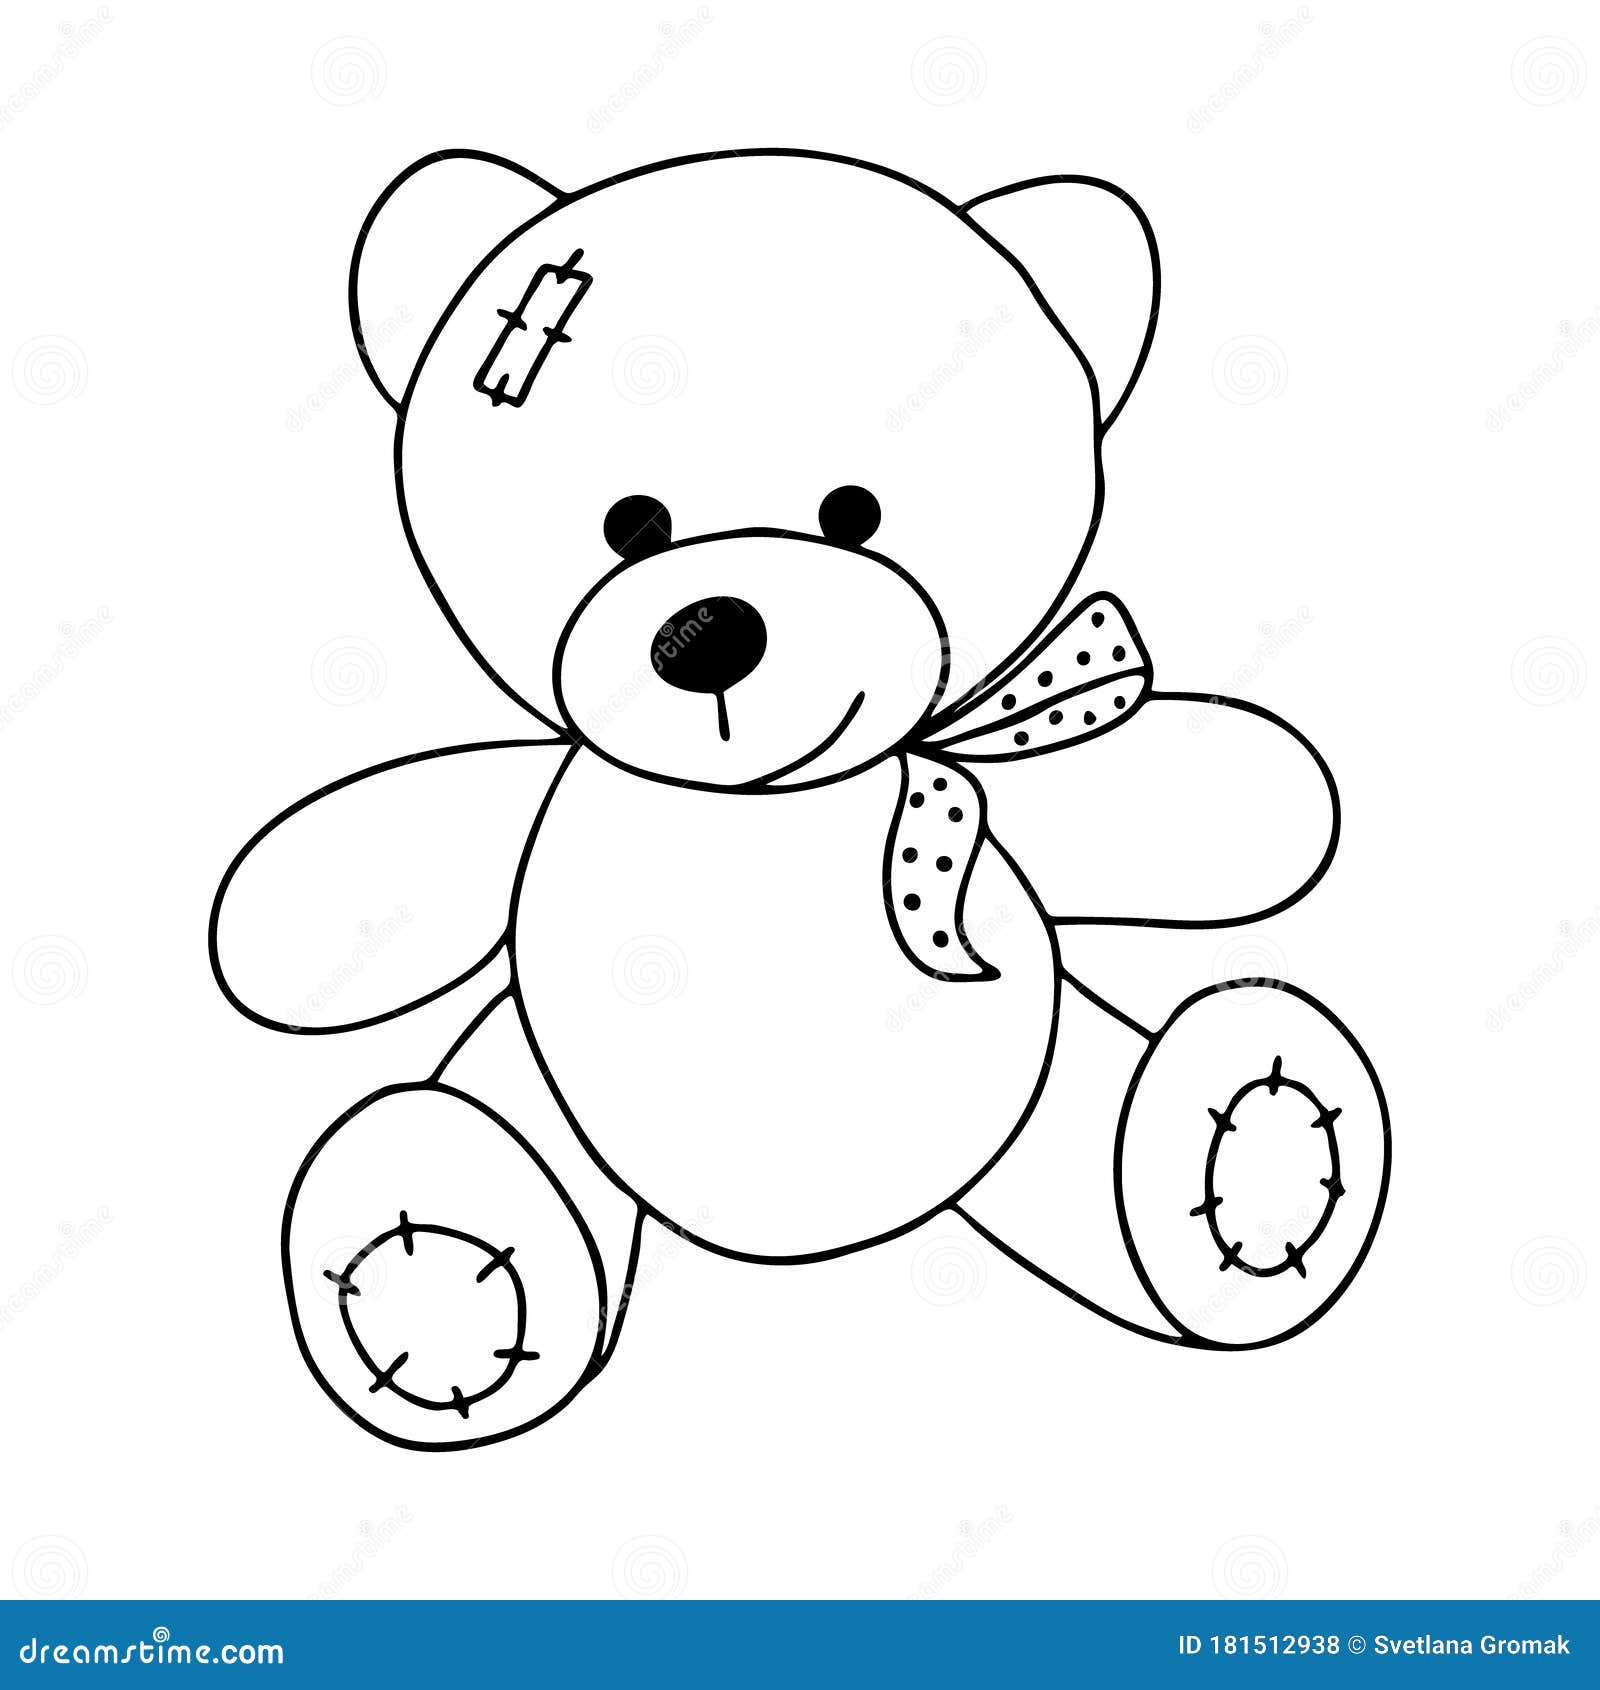 Drawing of cute teddy bear with butterfly Greeting Card by Anna Abramskaya